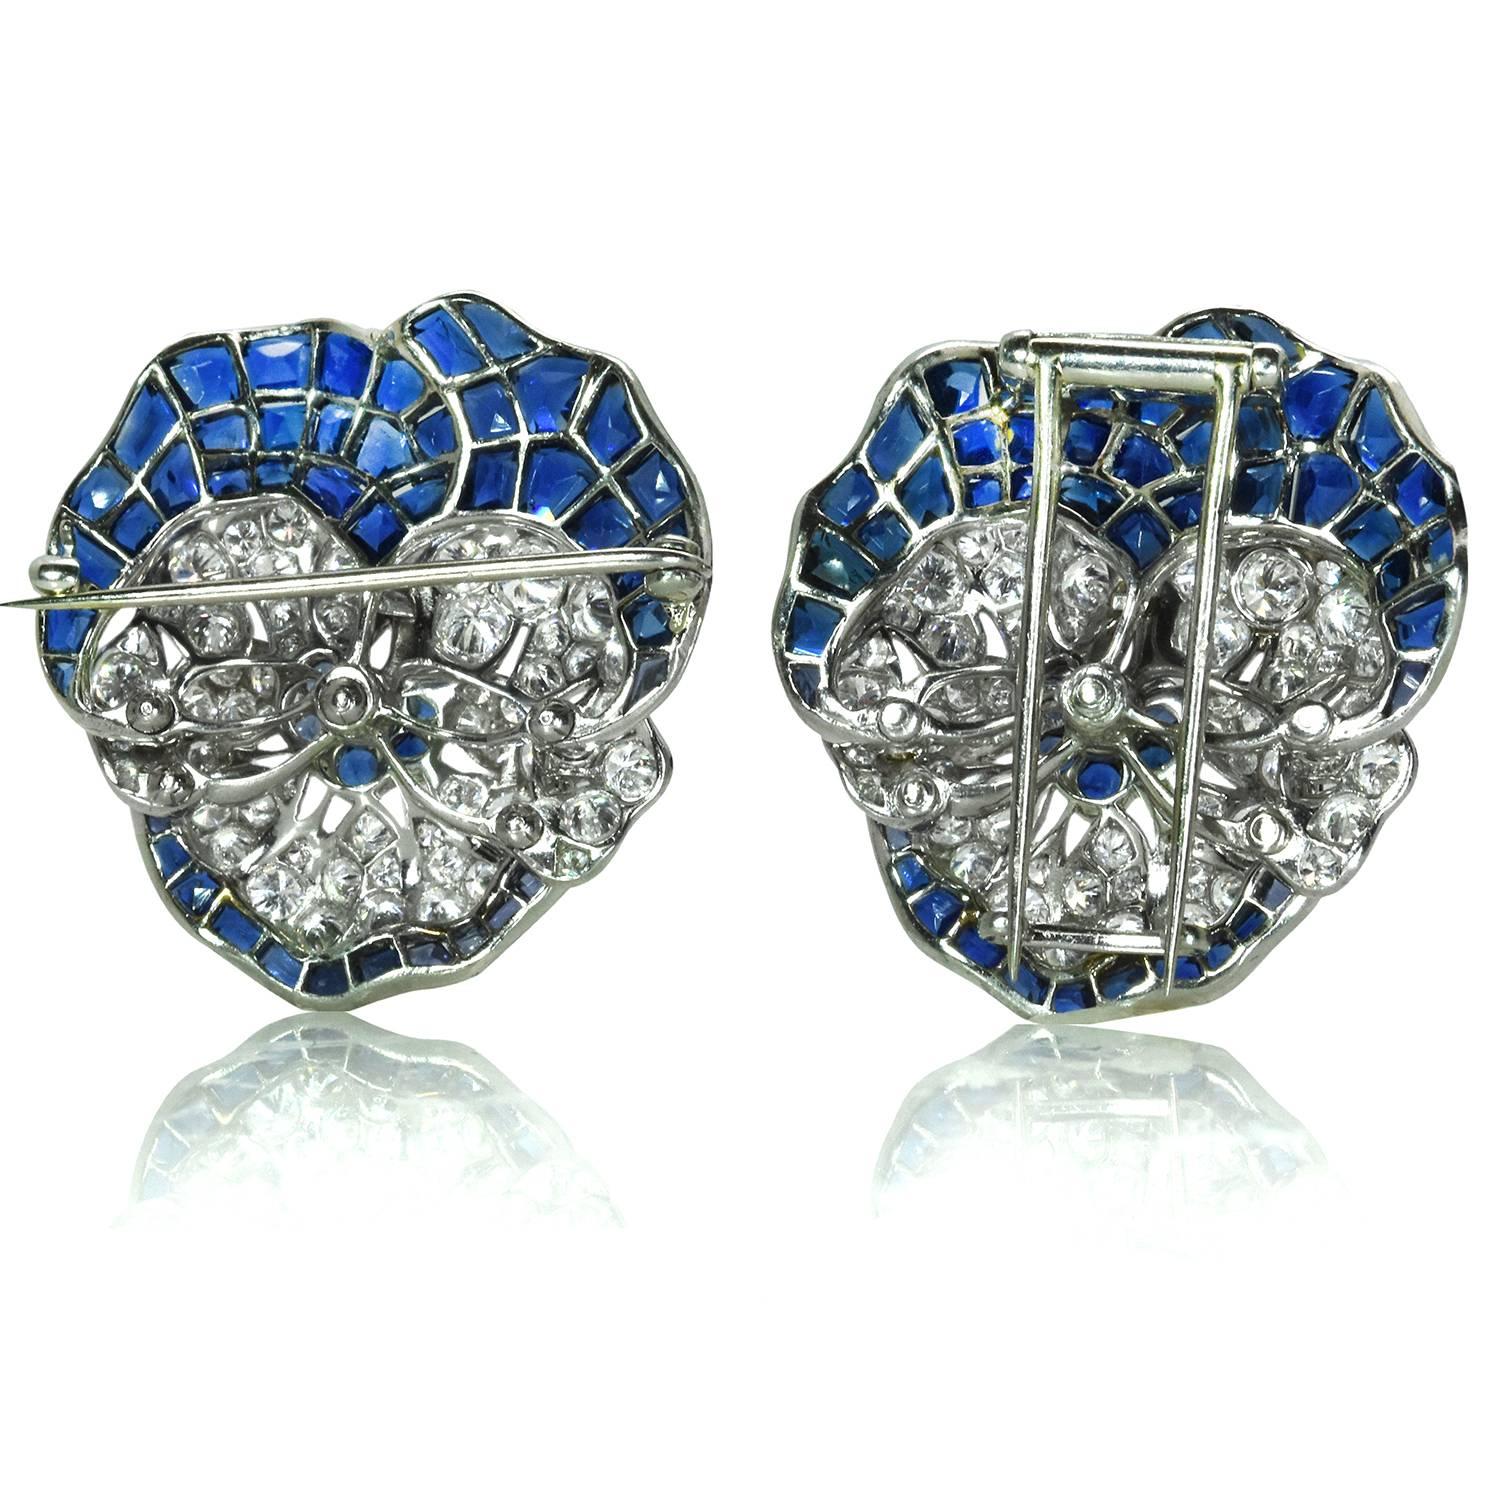  A pair of iconic pansy pins by Oscar Heyman & Brothers. The pins feature approximately 8.00 carats of sapphires and 2.60 carats of diamonds each, which are set in platinum. Both pins are accompanied by authentication letters from Oscar Heyman &